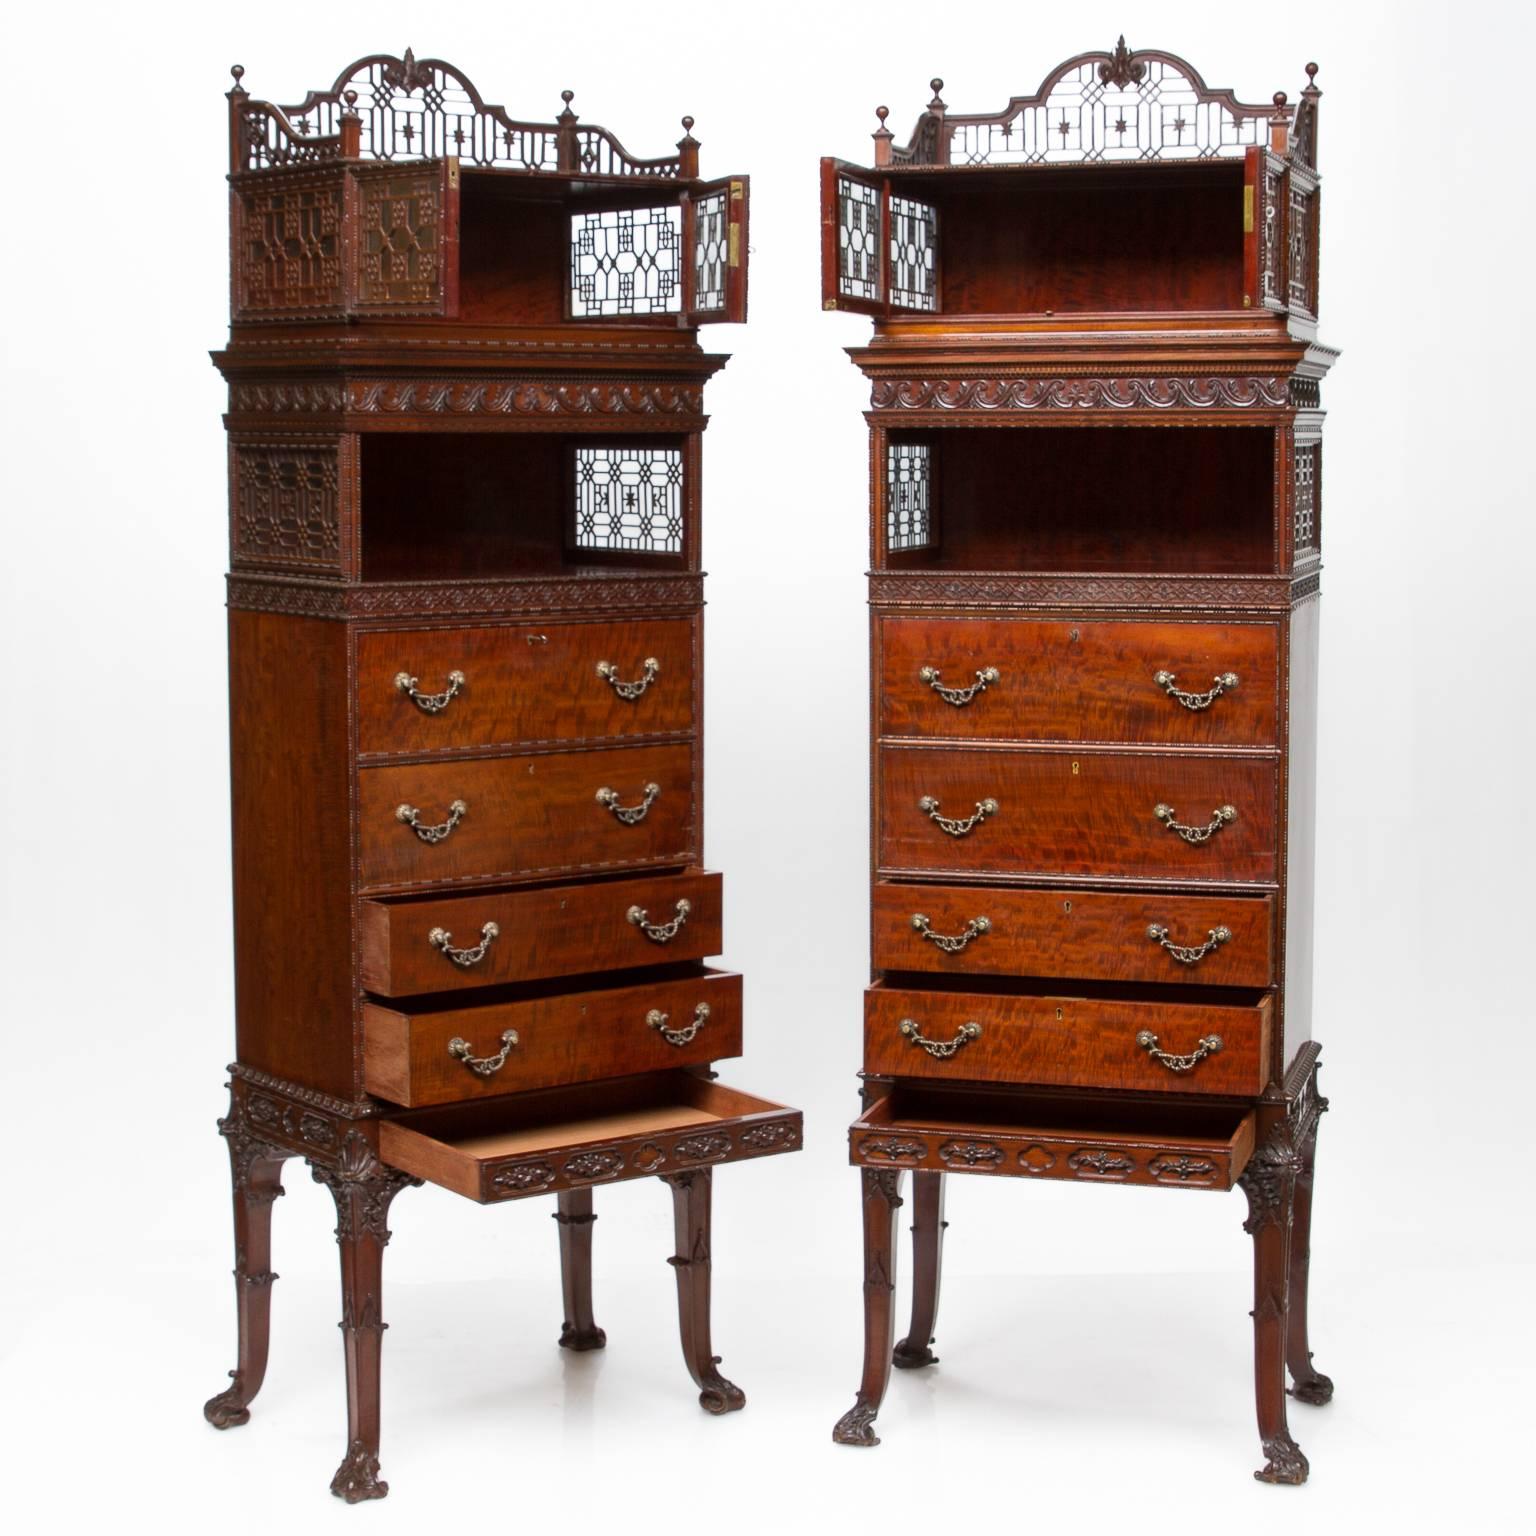 Great Britain (UK) 19th Century Chippendale Mahogany Cabinets with Secretary Fronts